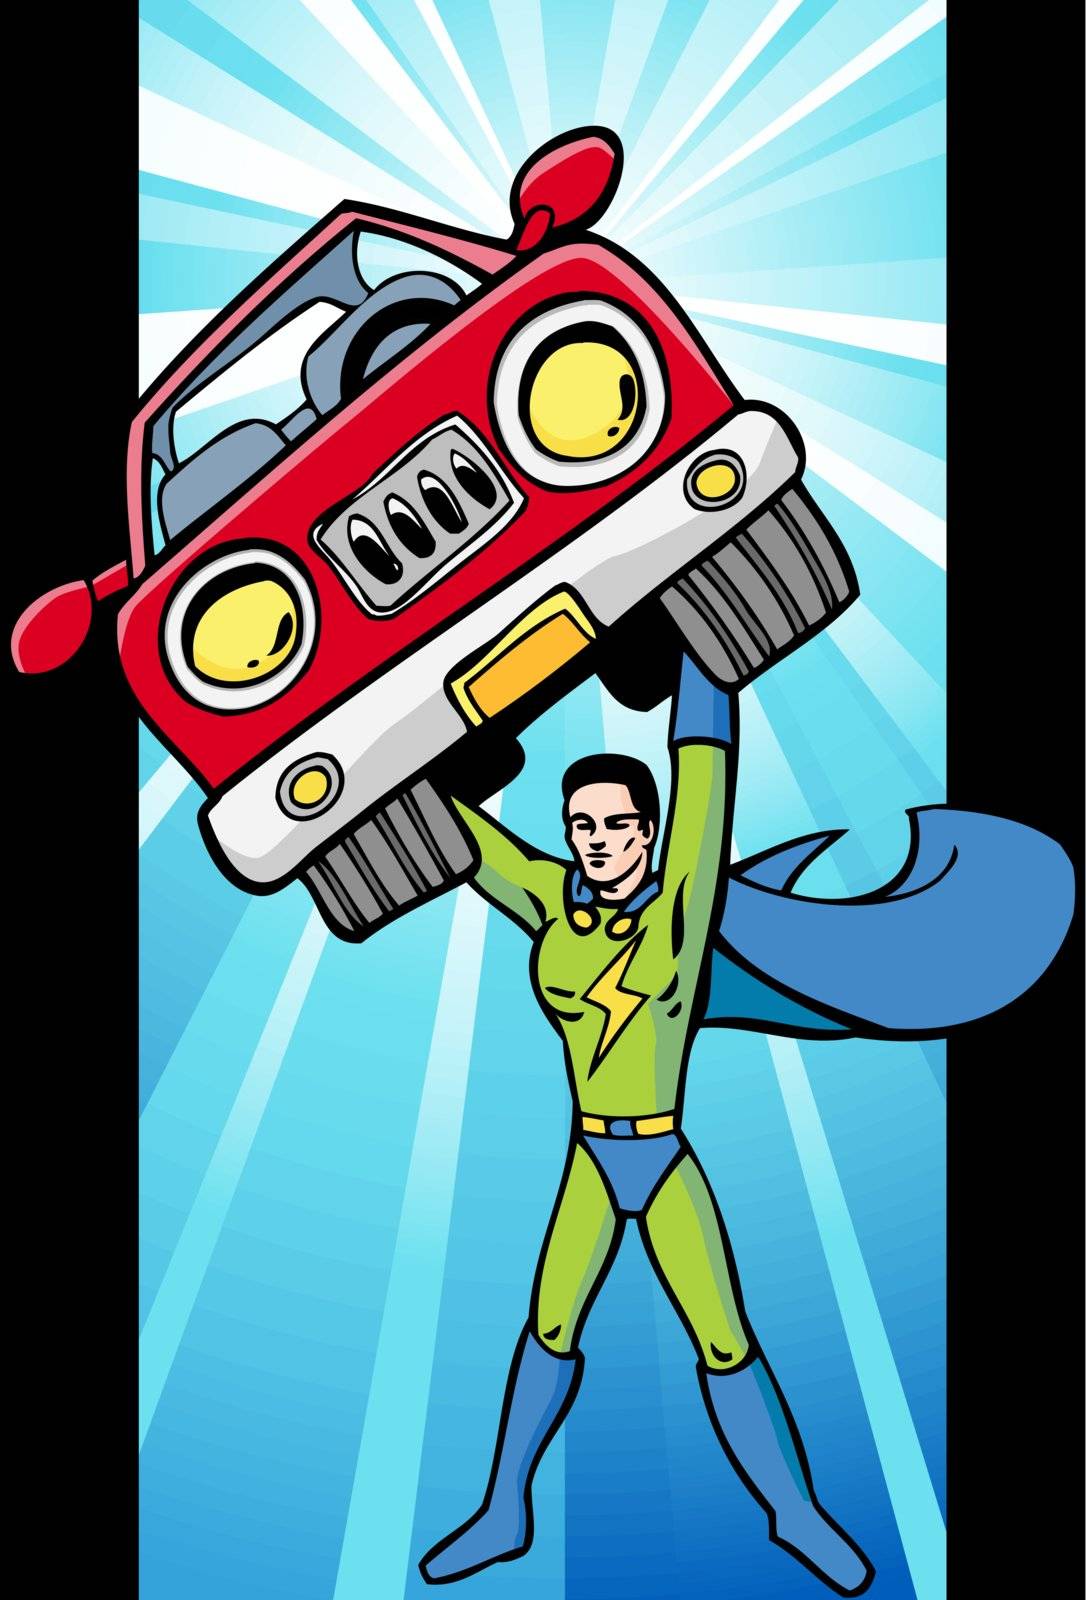 Energy superhero lifting a car in his fight against energy wasters.